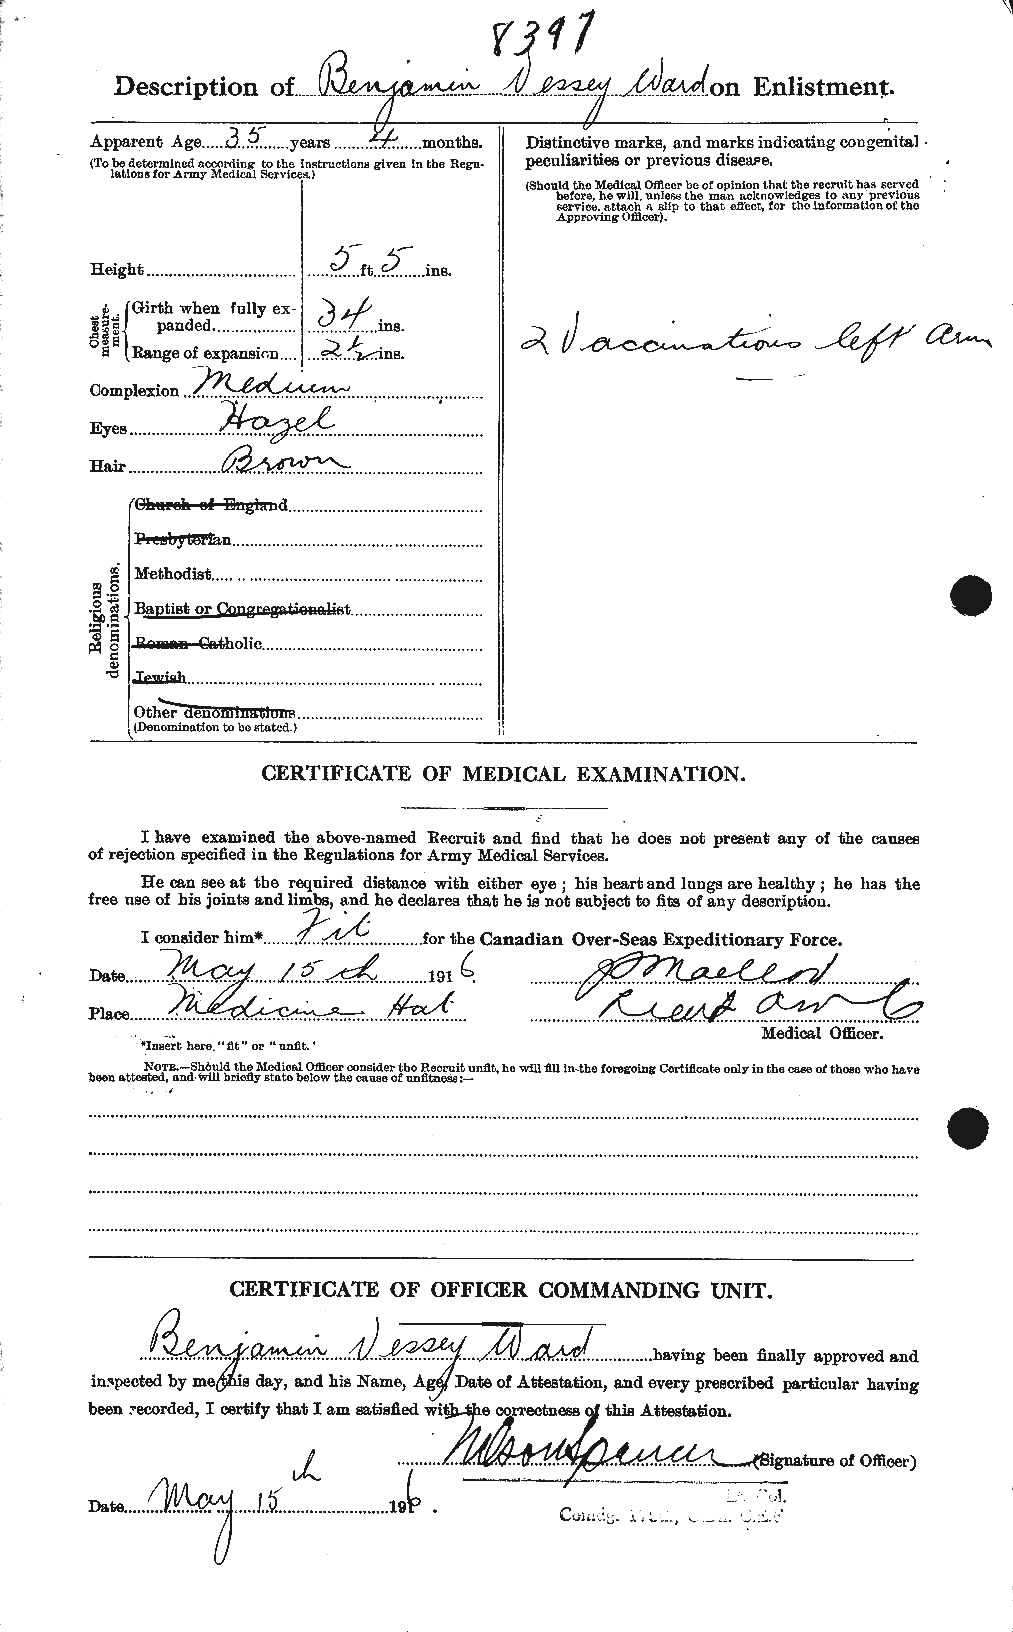 Personnel Records of the First World War - CEF 655164b